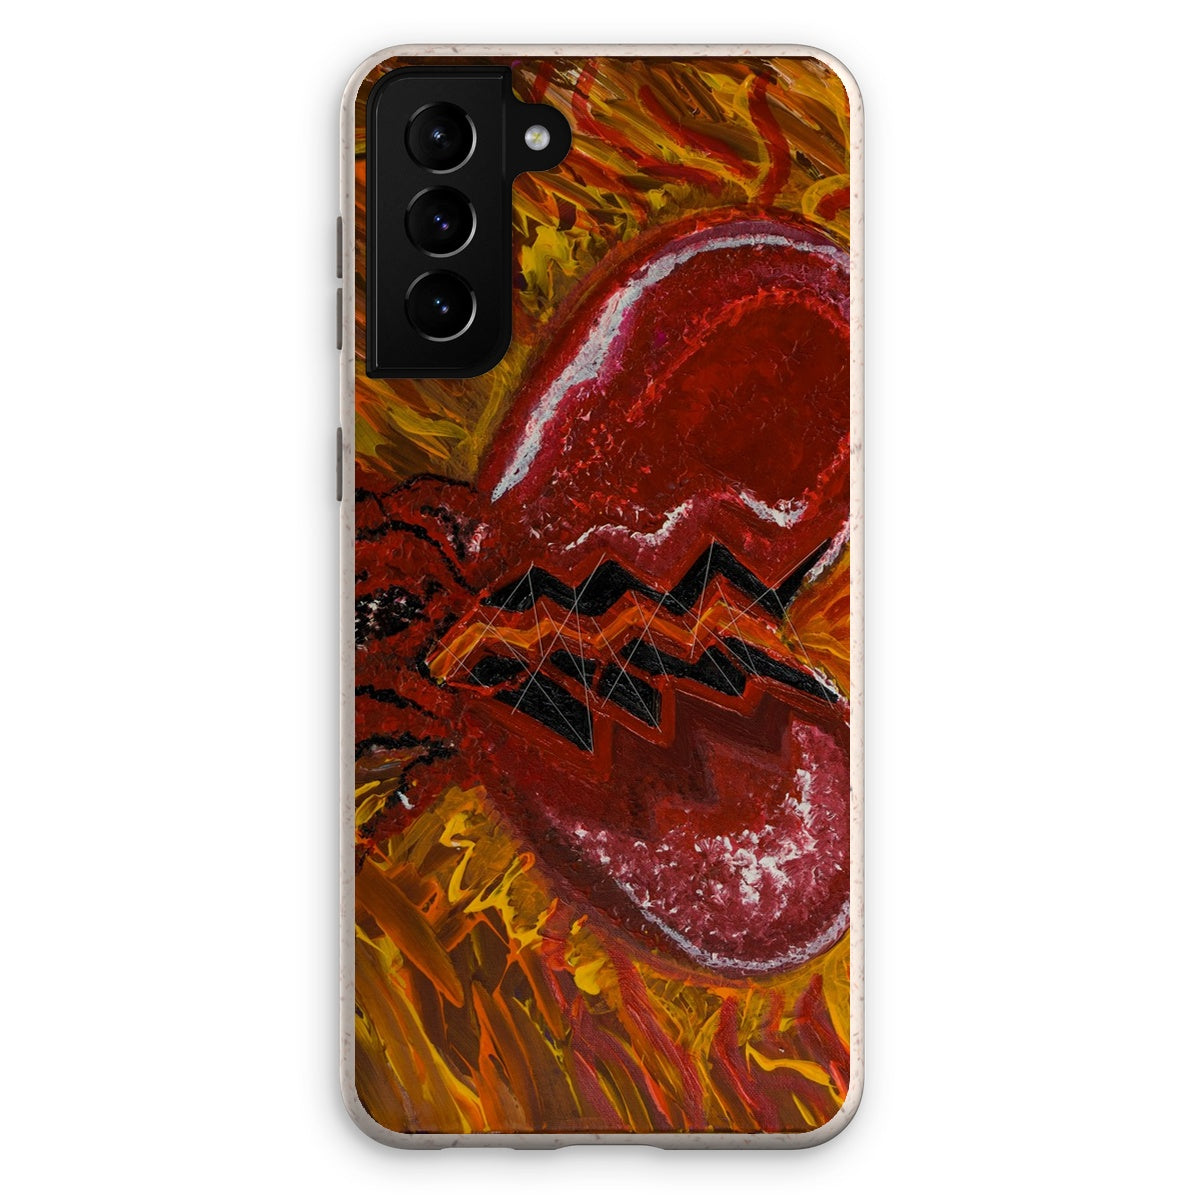 Blood of Hearts Eco Phone Case